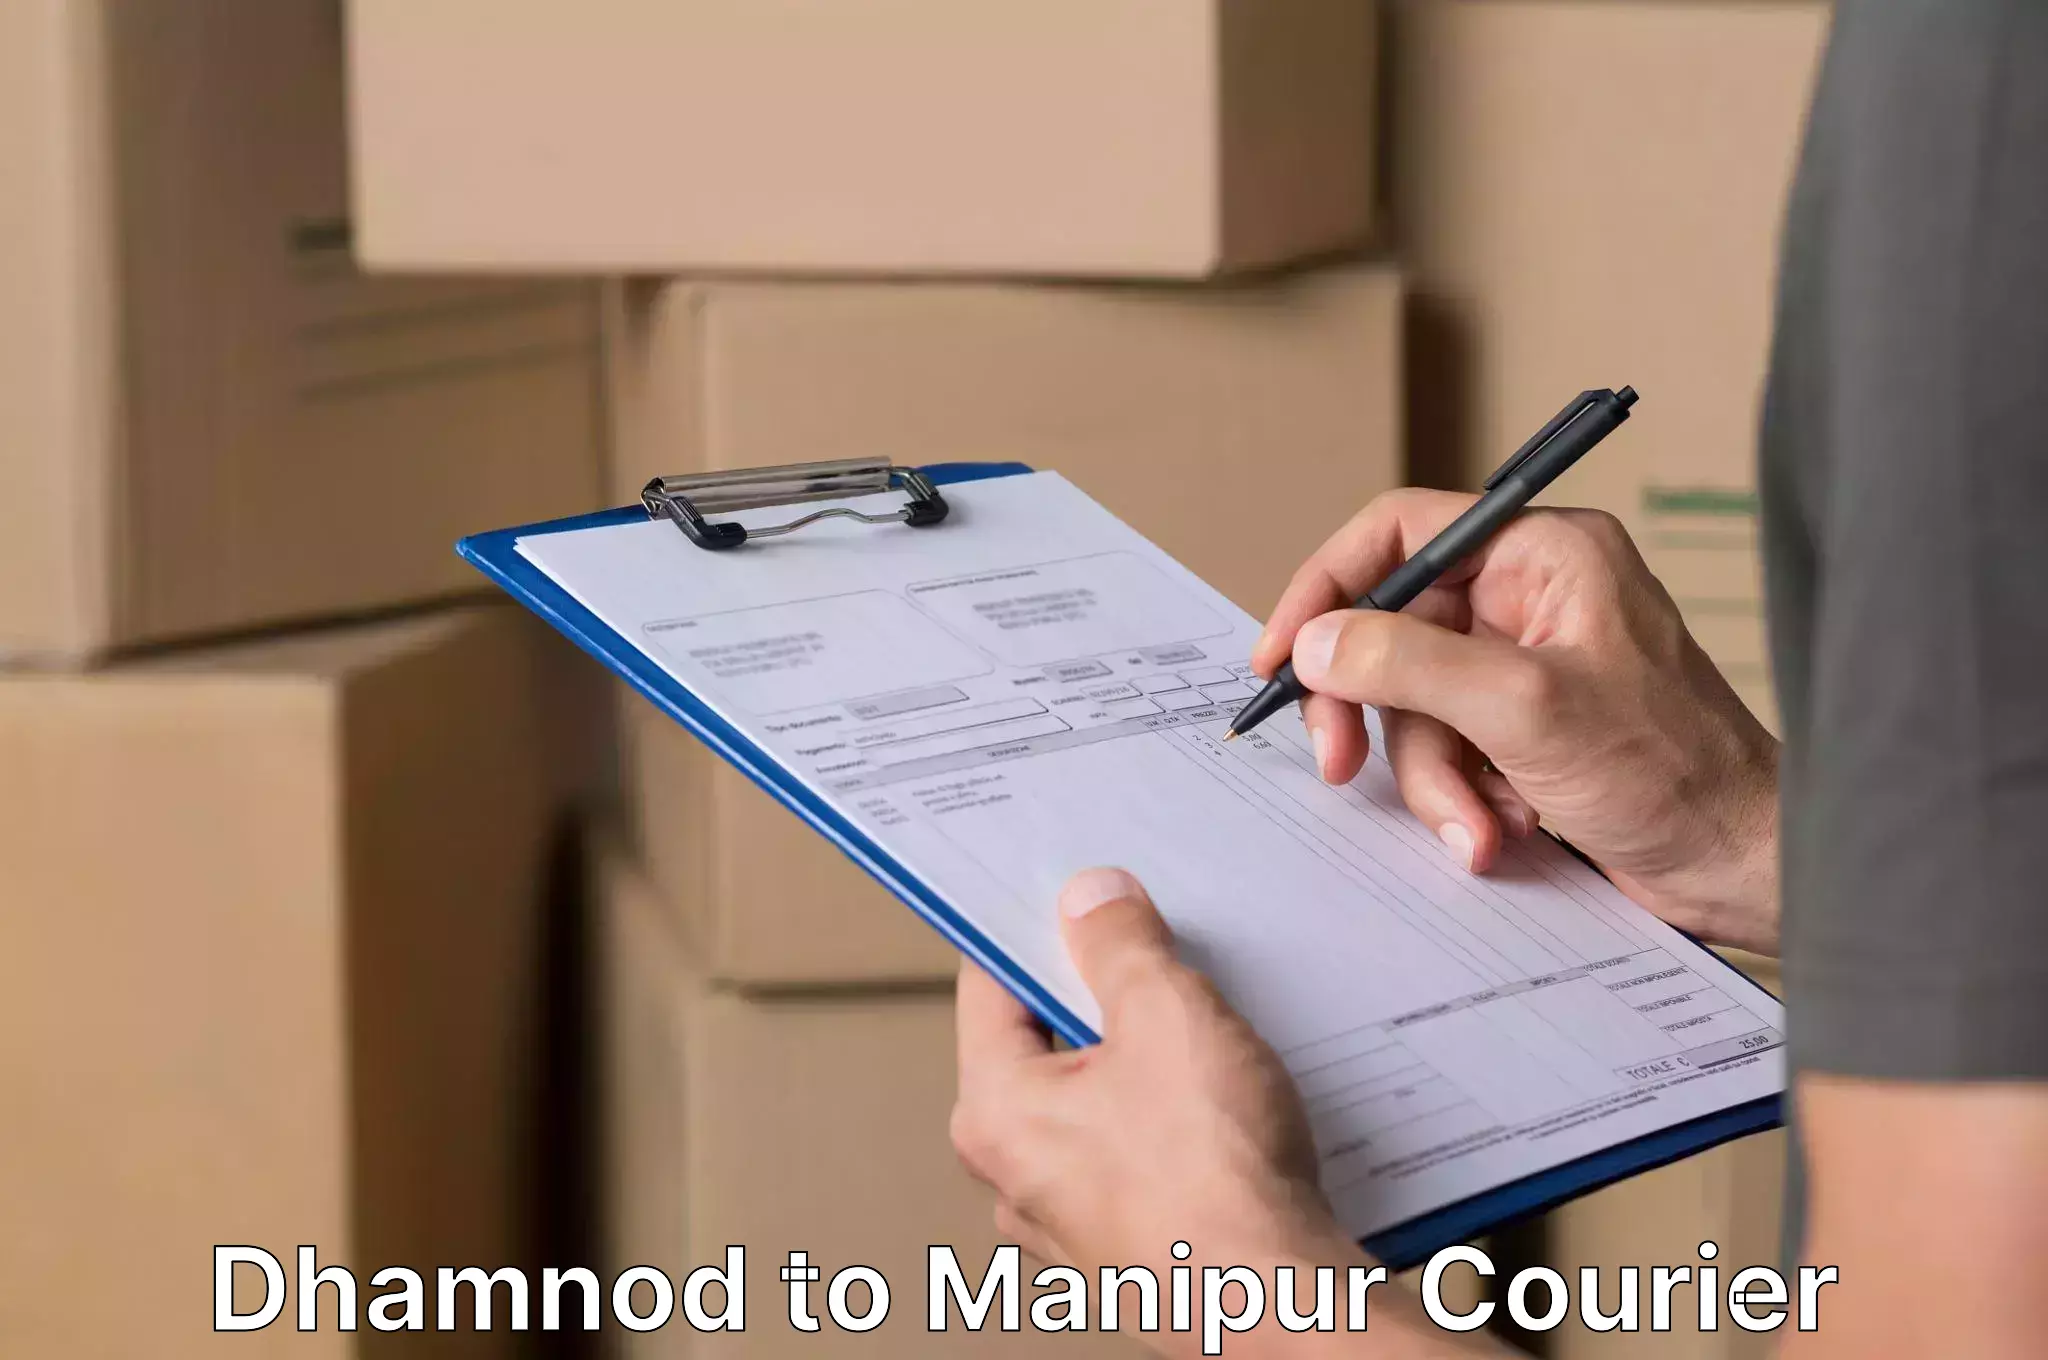 Furniture transport experts Dhamnod to Manipur